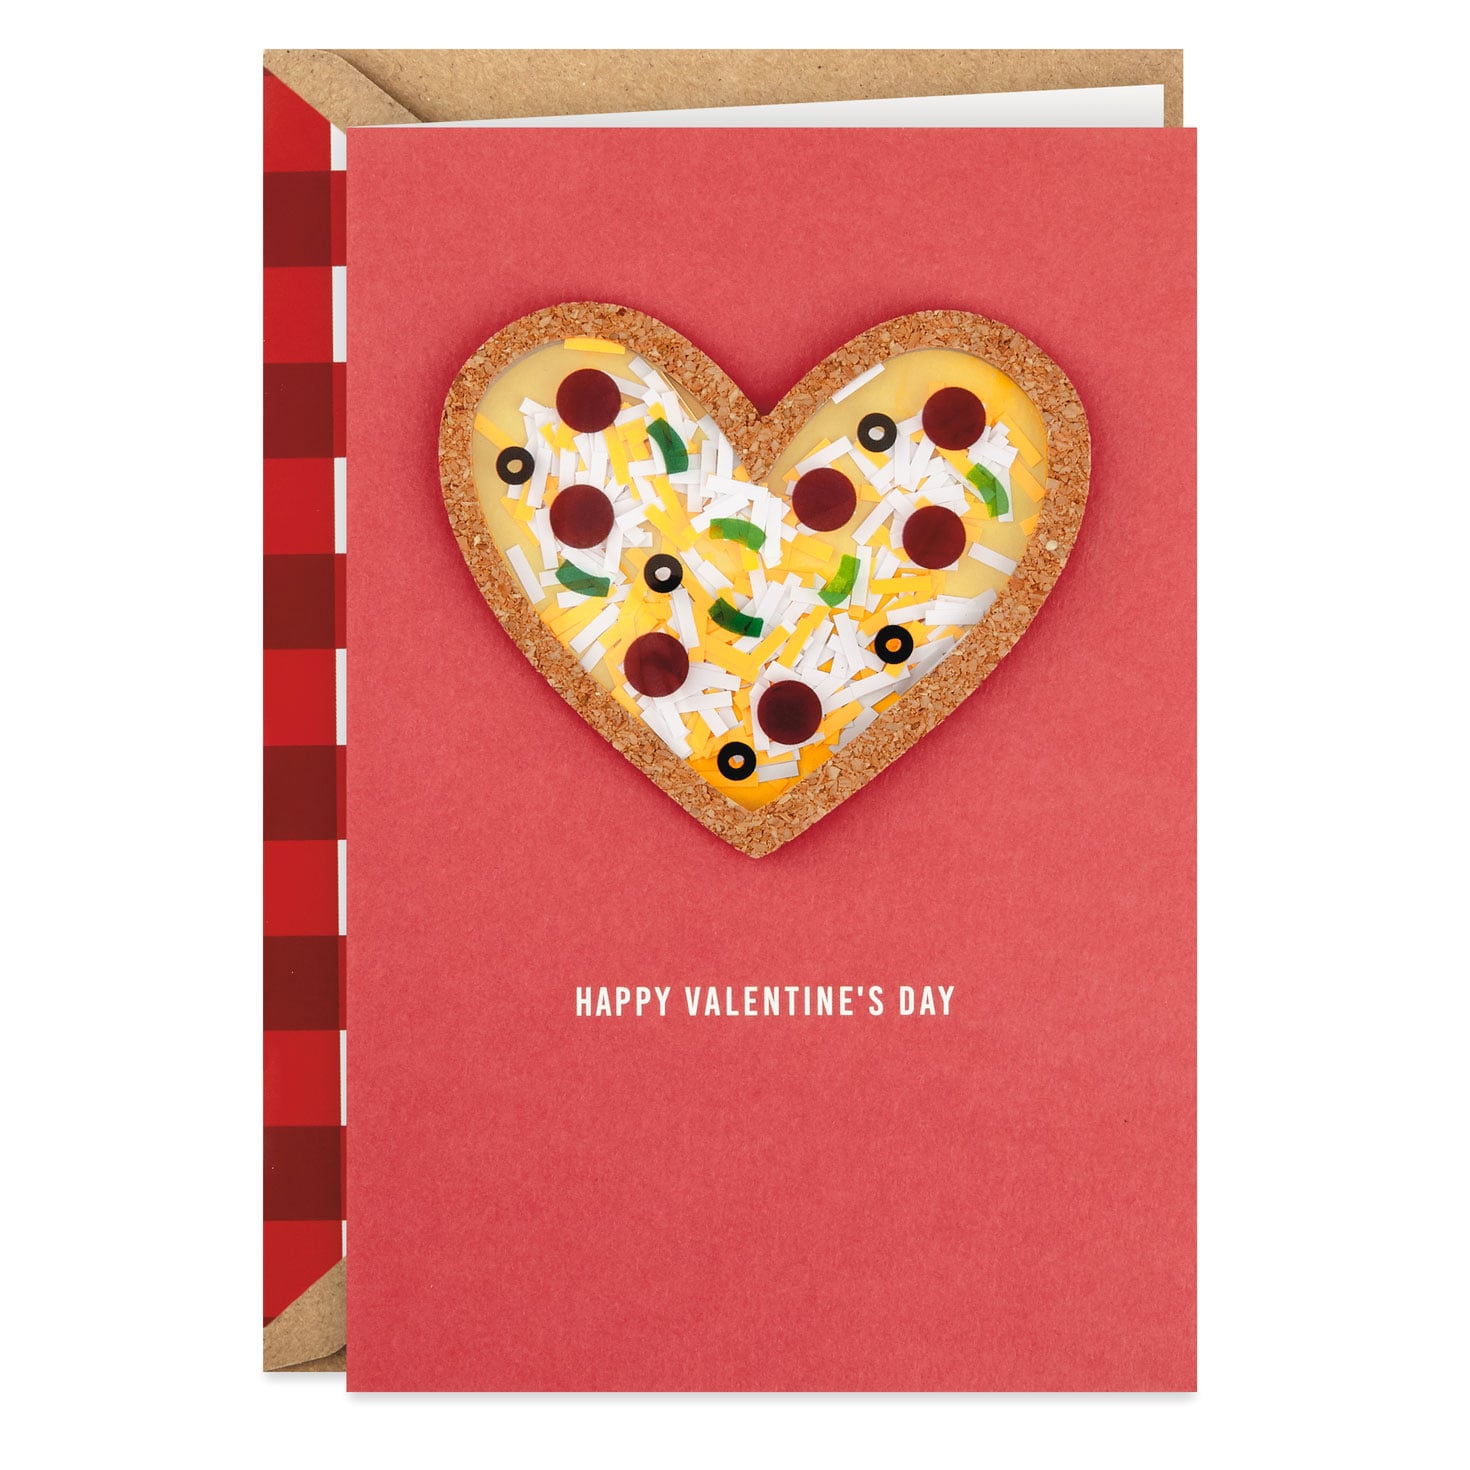 You've Got a Big Pizza My Heart Valentine's Day Card - Greeting Cards - Hallmark